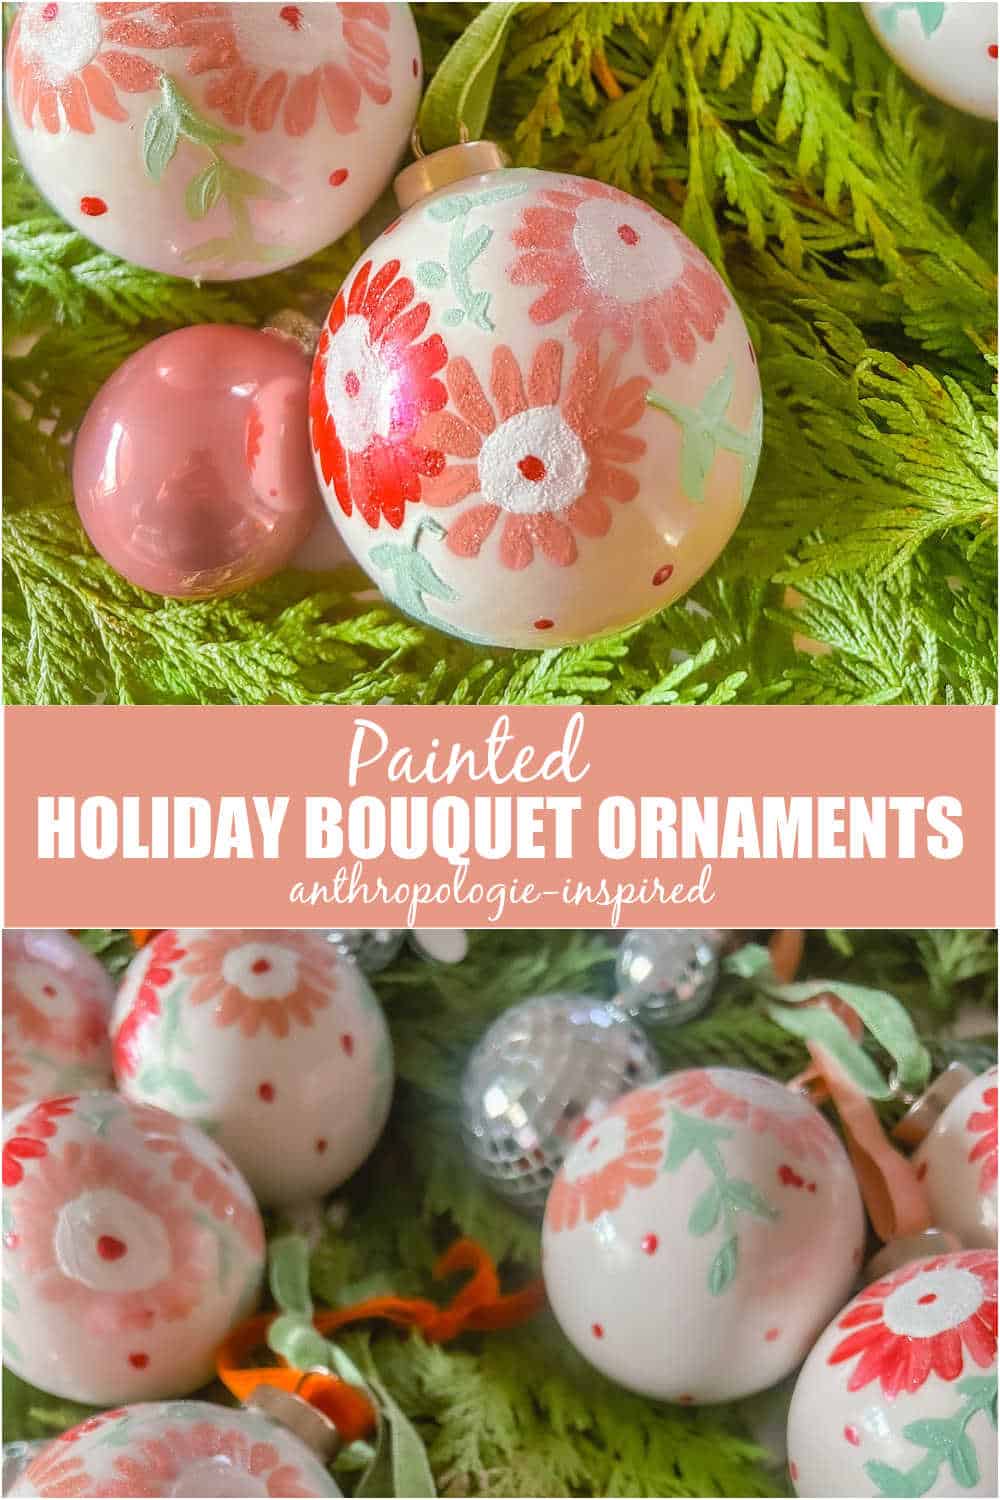 Anthropologie-Inspired Painted Bouquet Holiday Ornaments.  Turn plain white ornaments into colorful floral ornaments by using craft paint and glitter for an inexpensive ornament alternative. 